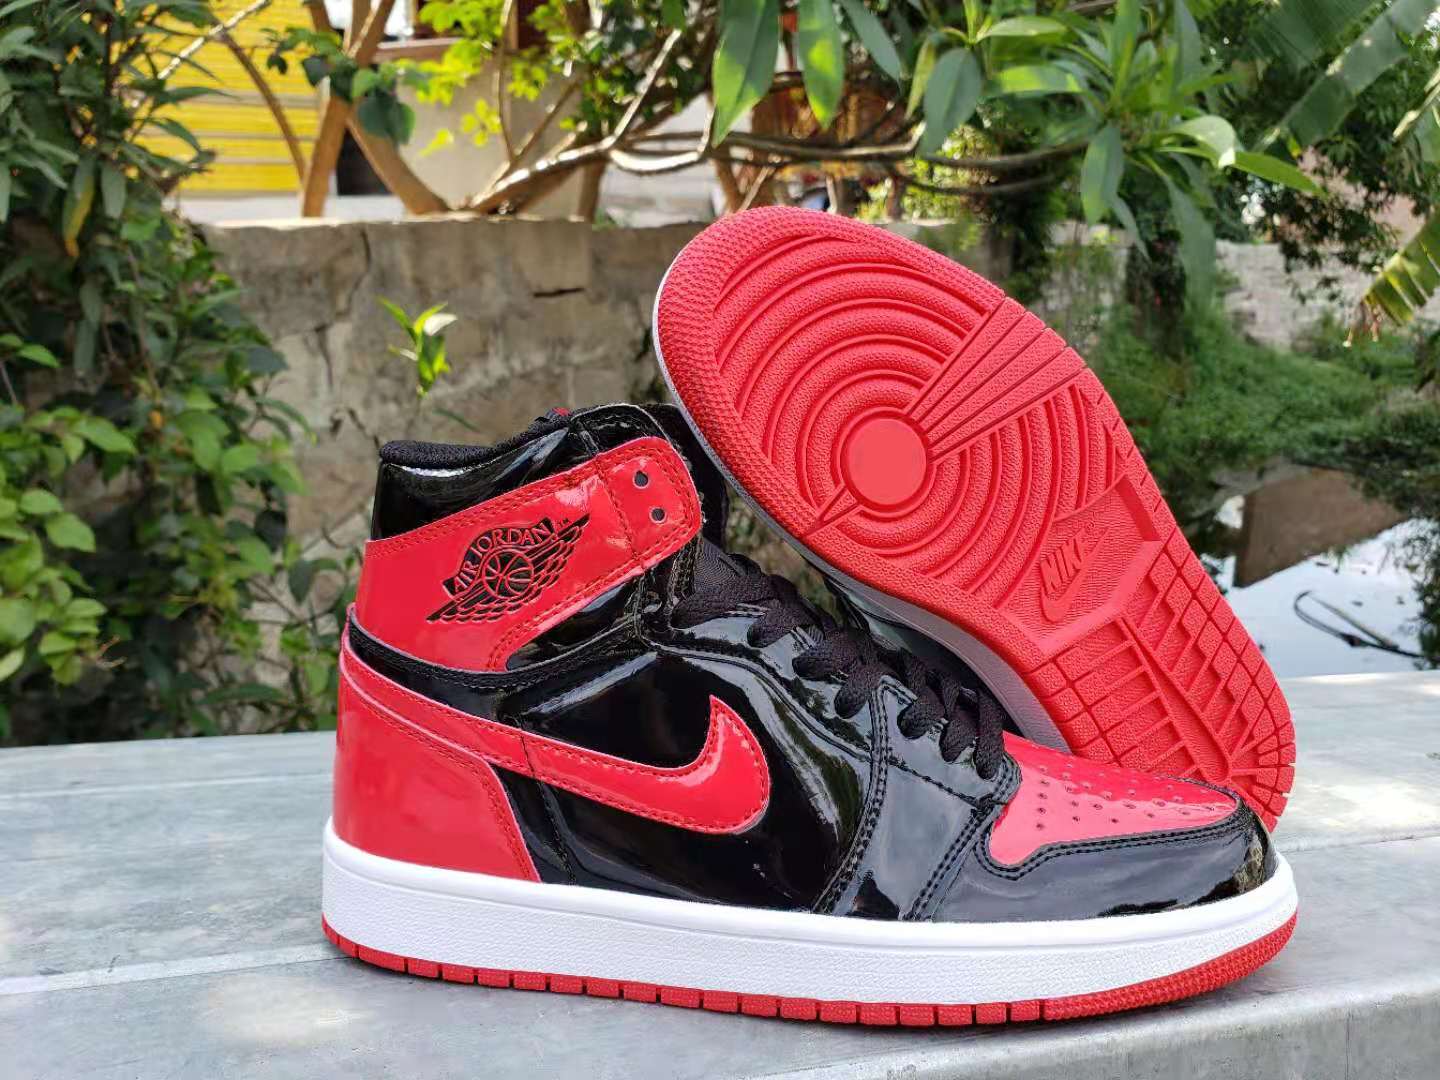 Latest Air Jordan 1 Patent Leather Black Red Shoes For Women